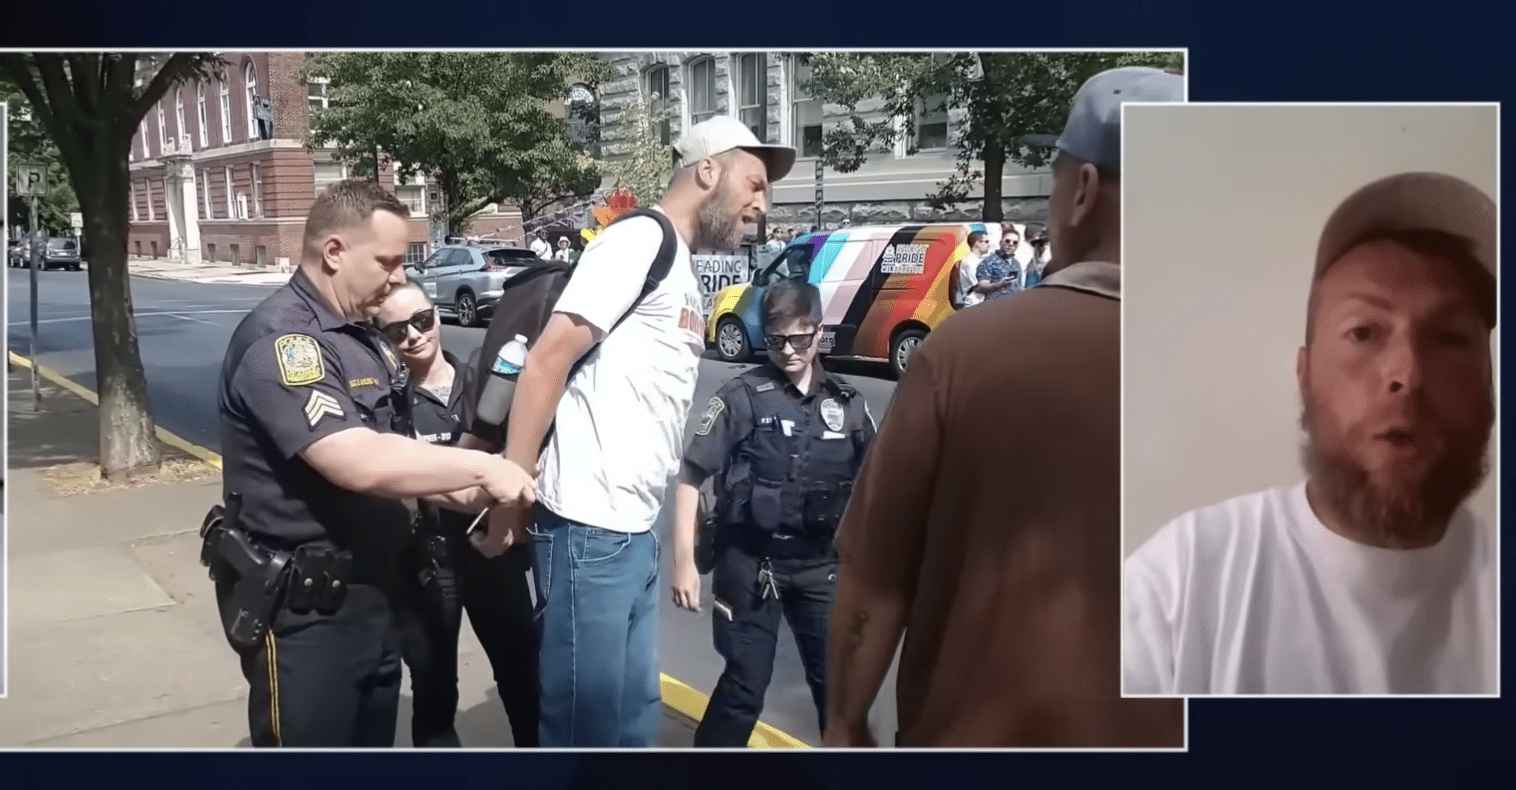 City council members in Pennsylvania back police for arresting man for quoting scripture at “Pride Rally”